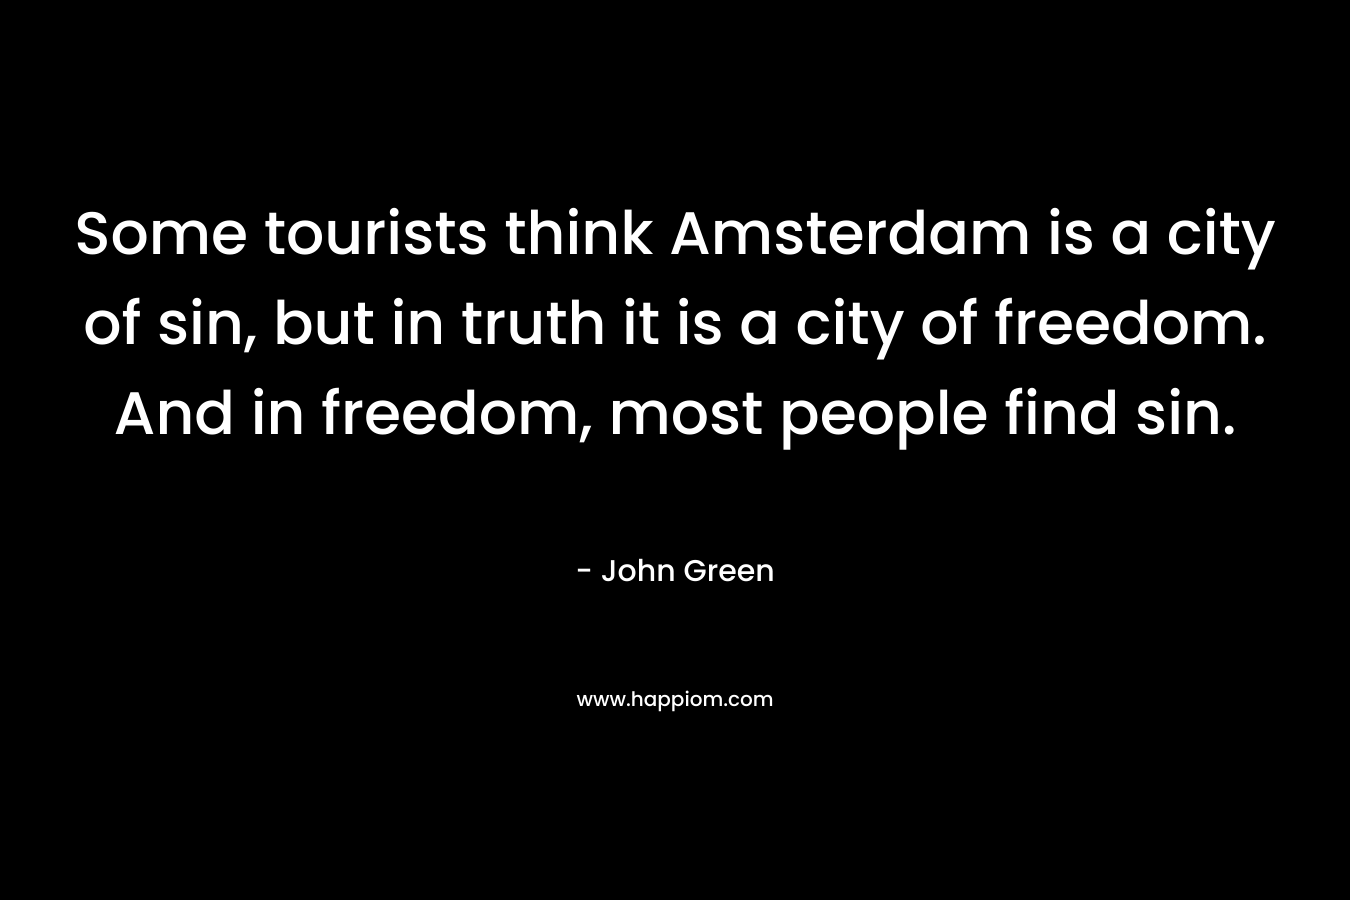 Some tourists think Amsterdam is a city of sin, but in truth it is a city of freedom. And in freedom, most people find sin.